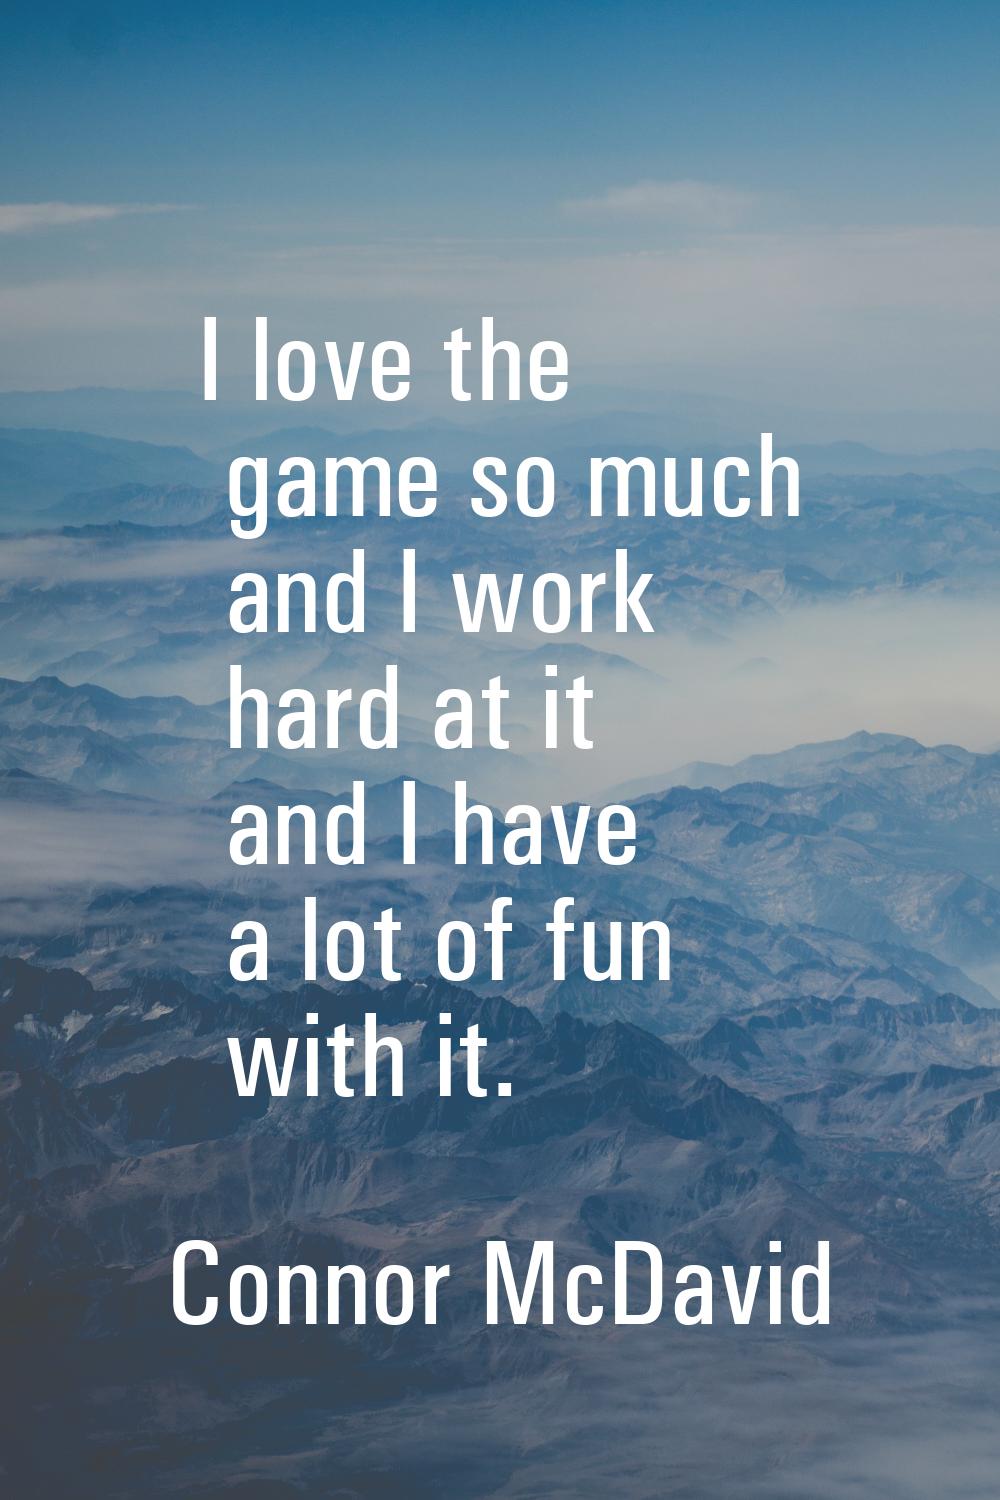 I love the game so much and I work hard at it and I have a lot of fun with it.